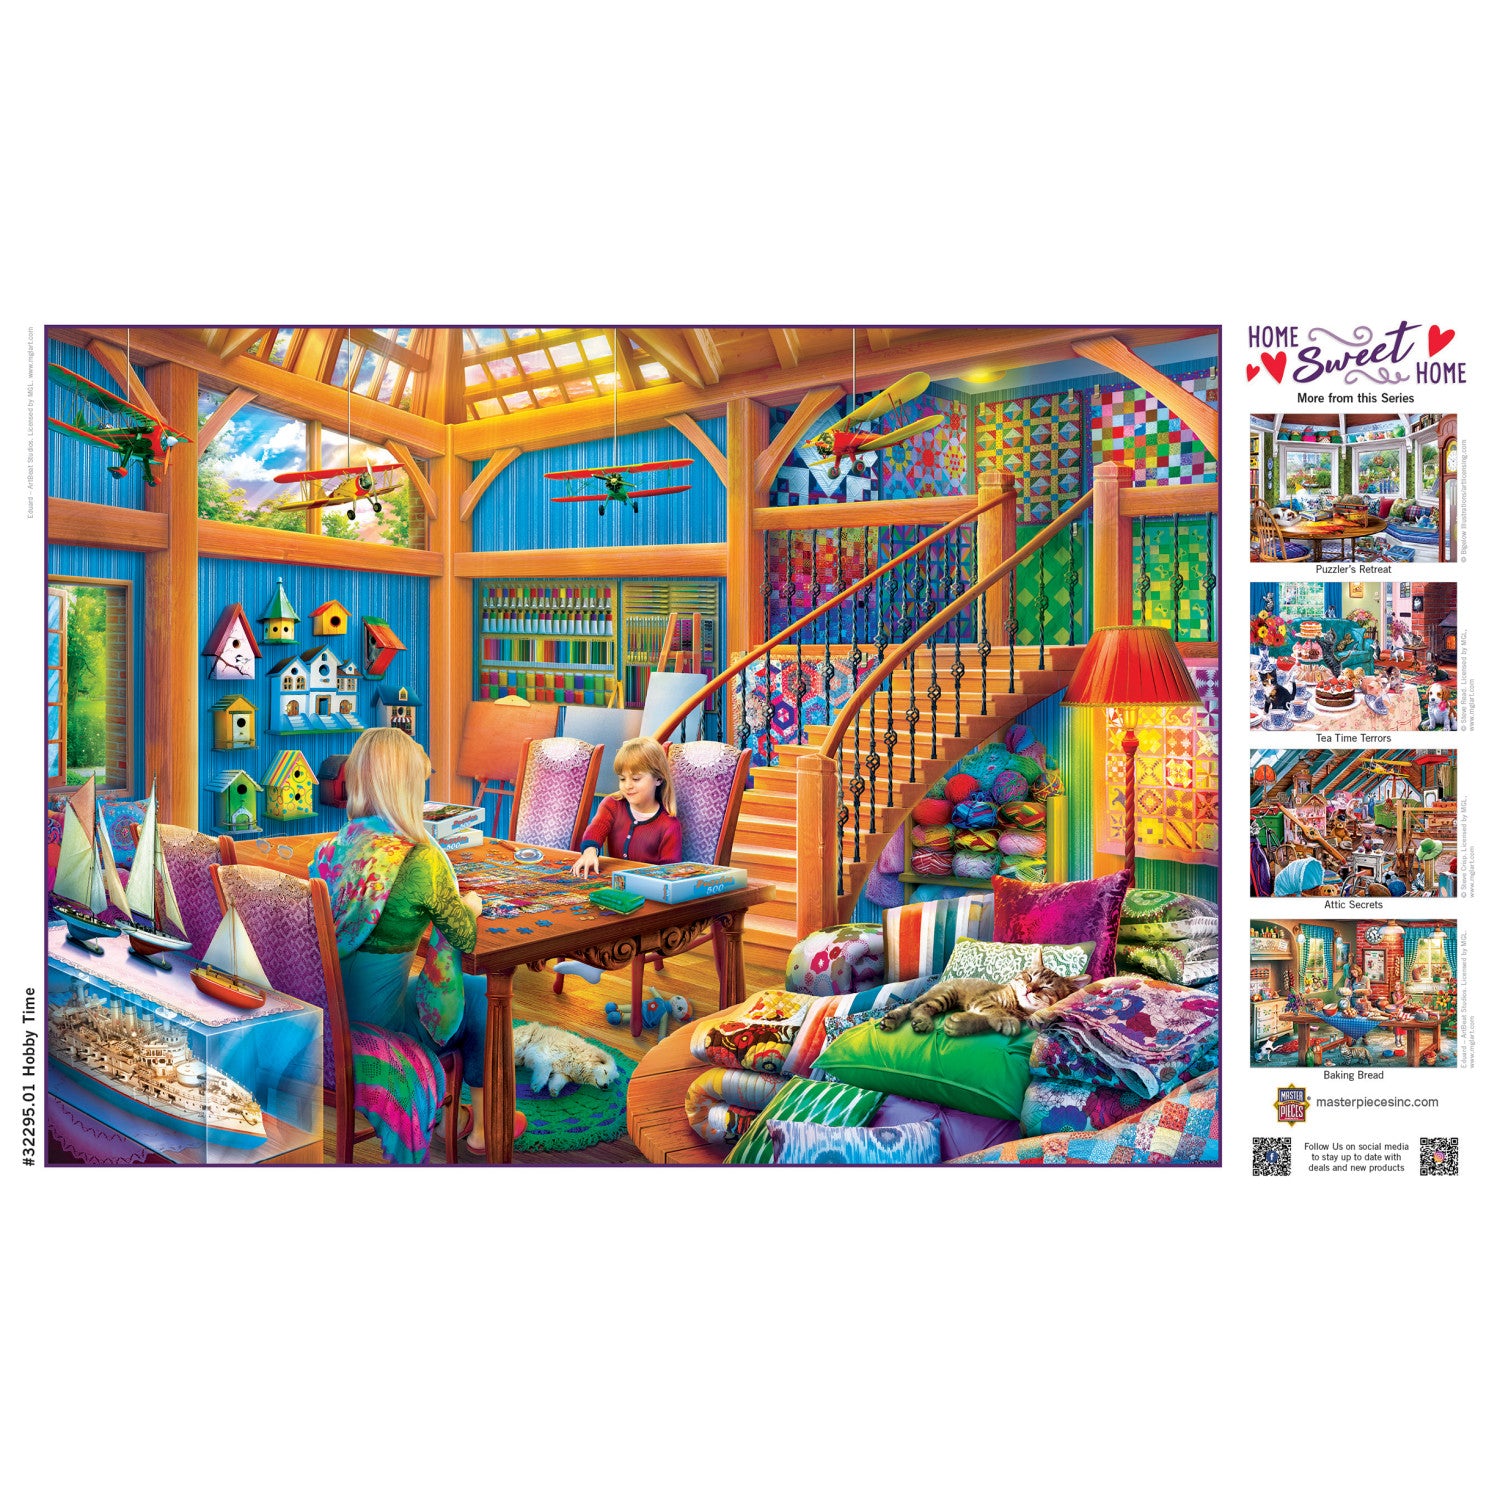 Home Sweet Home - Hobby Time 500 Piece Jigsaw Puzzle